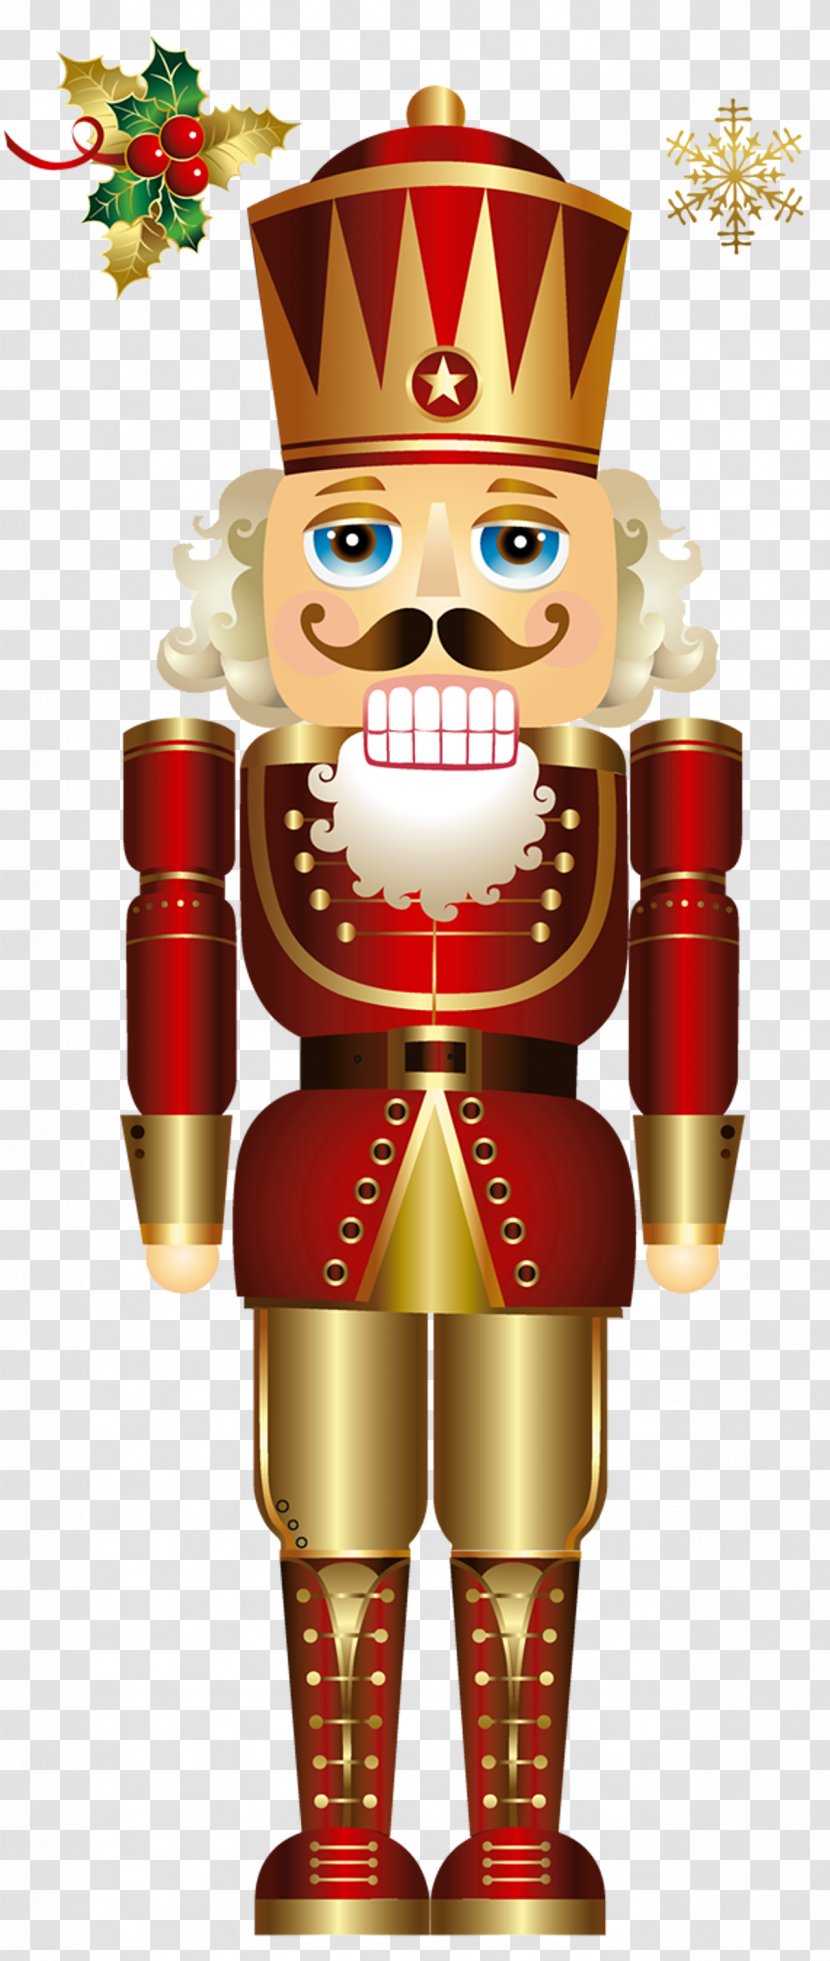 The Nutcracker And Mouse King Doll Clip Art - Christmas Ornament - Rehab Cliparts Transparent PNG